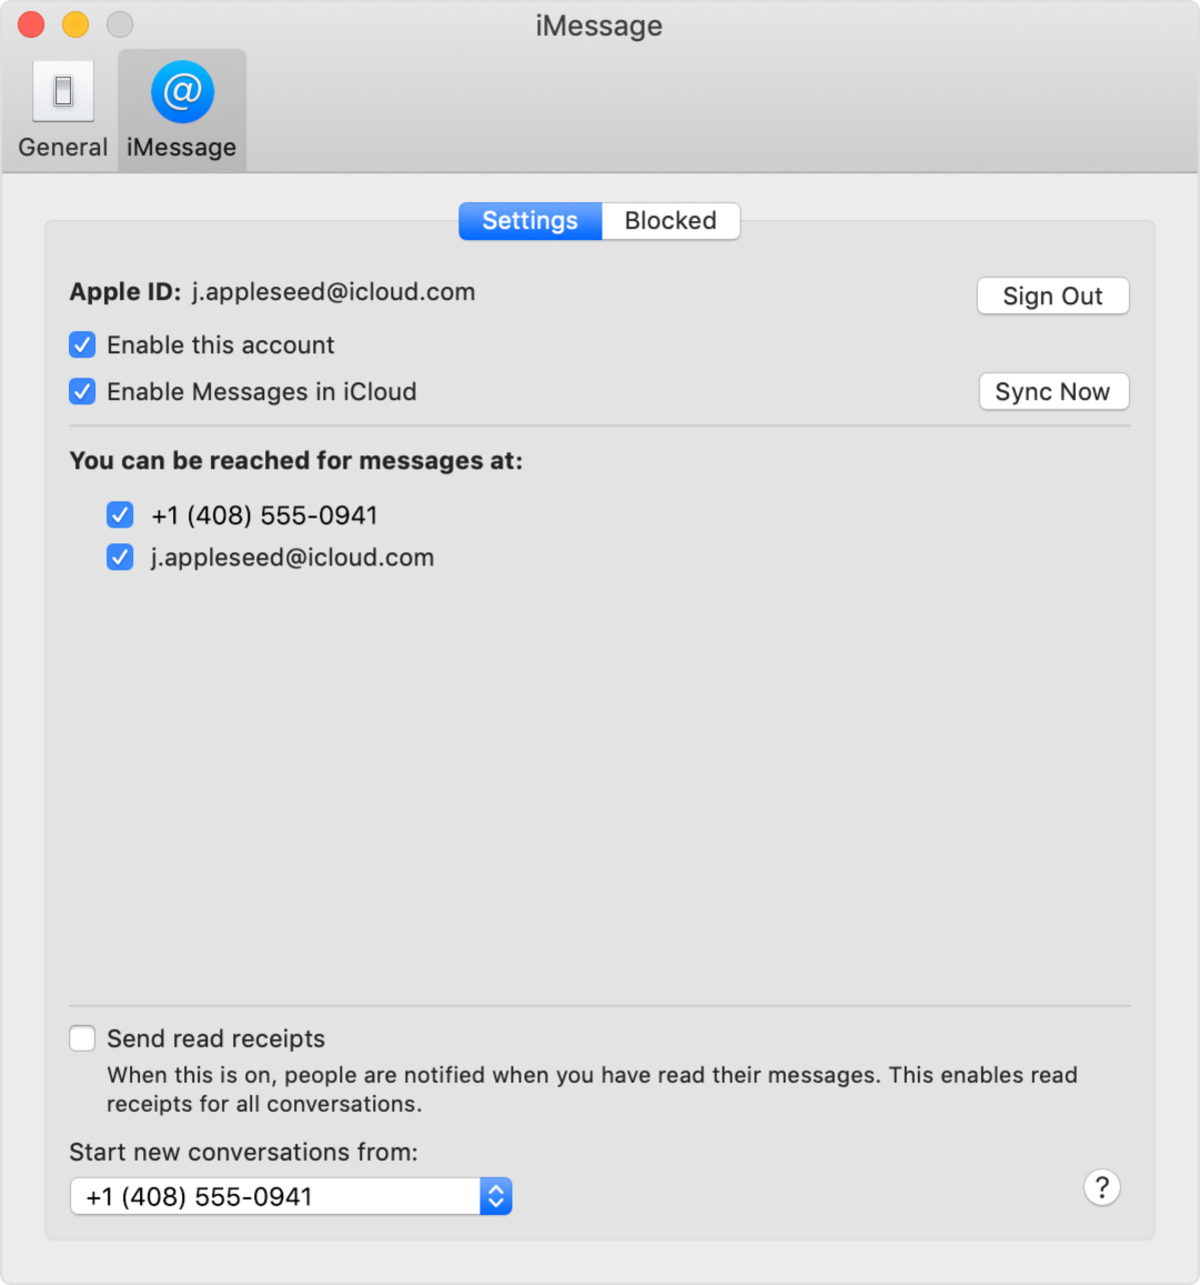 How To Register Phone Number With IMessage